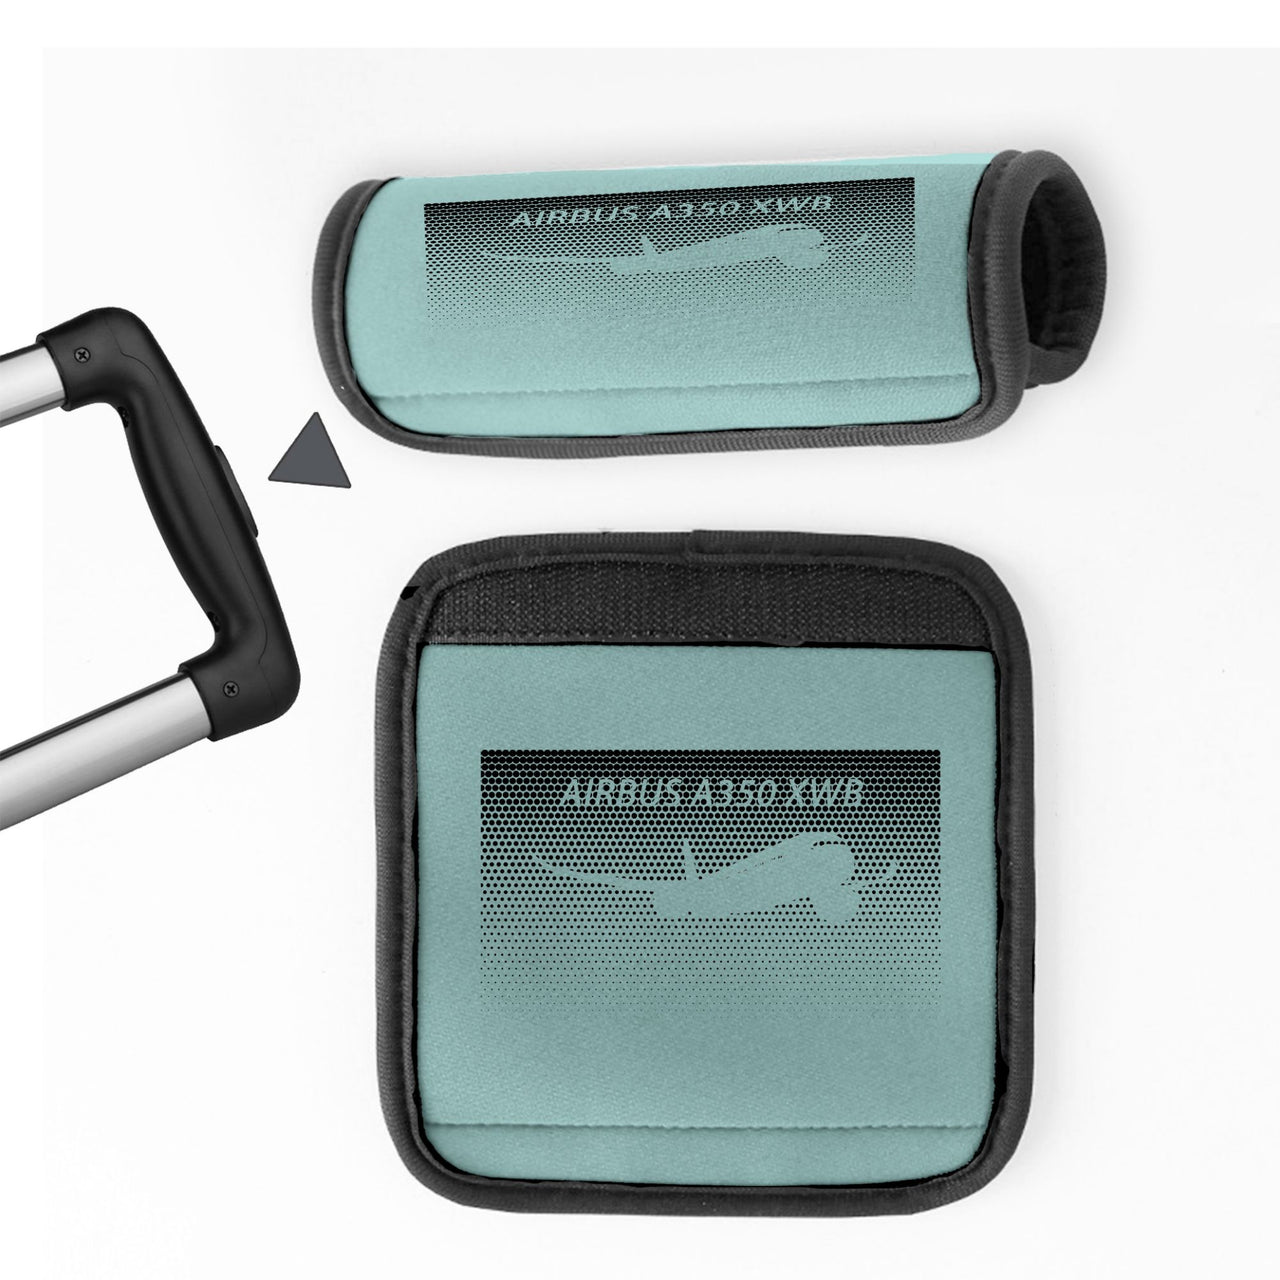 Airbus A350XWB & Dots Designed Neoprene Luggage Handle Covers